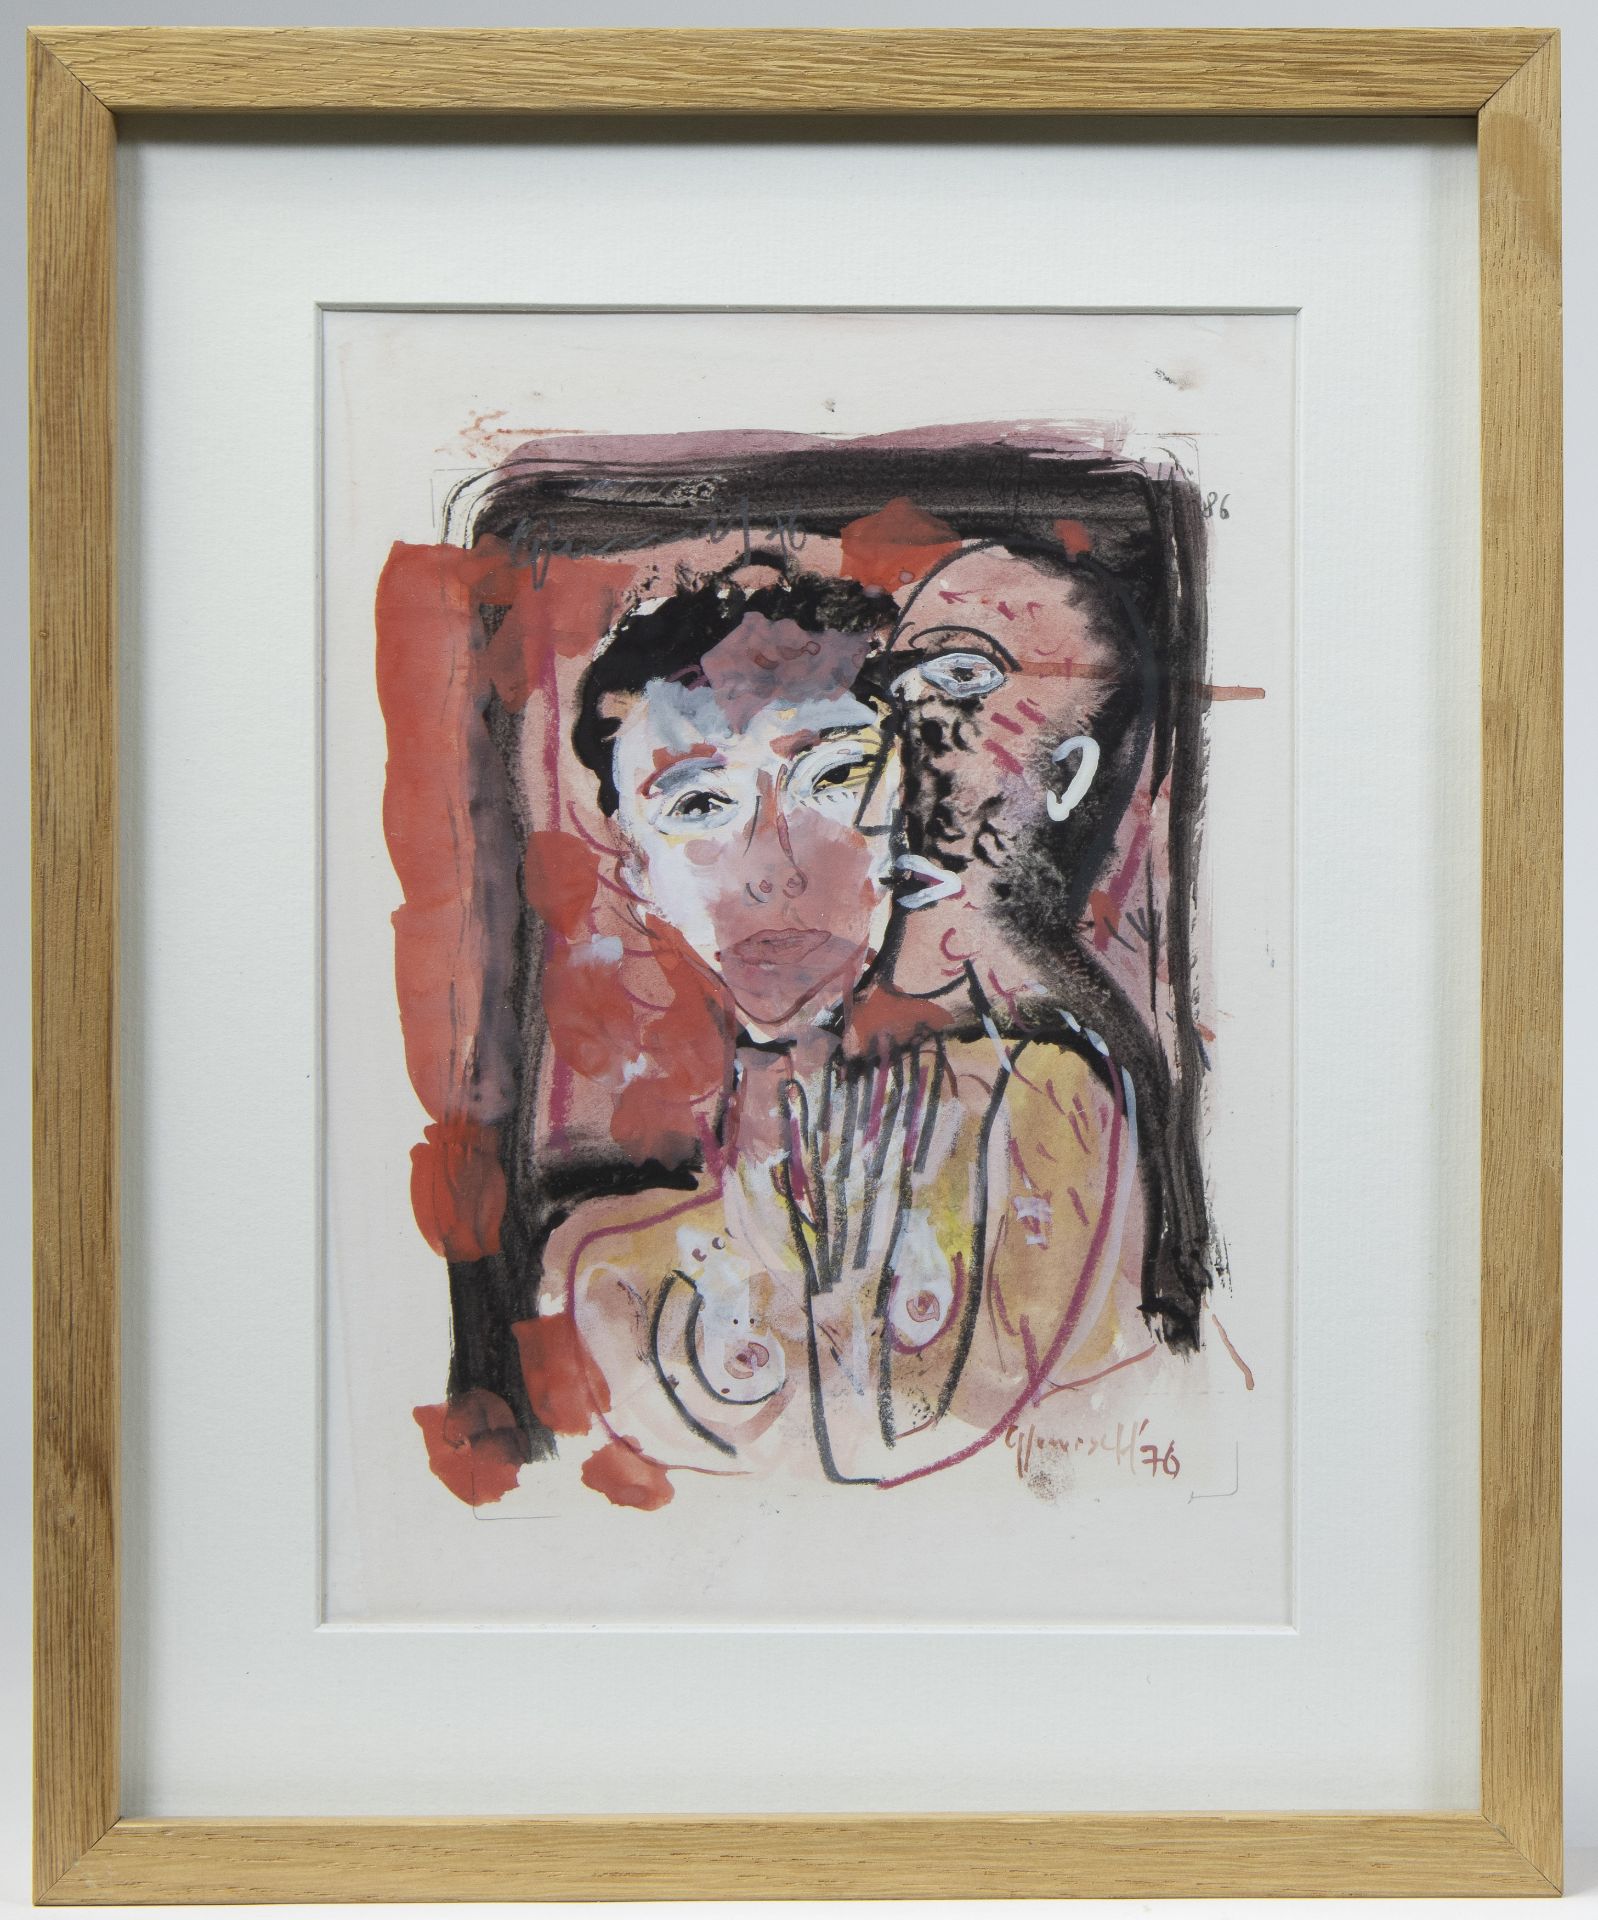 Godfried VERVISCH (1930-2014), mixed media Untitled, signed and dated '76 - Image 2 of 3